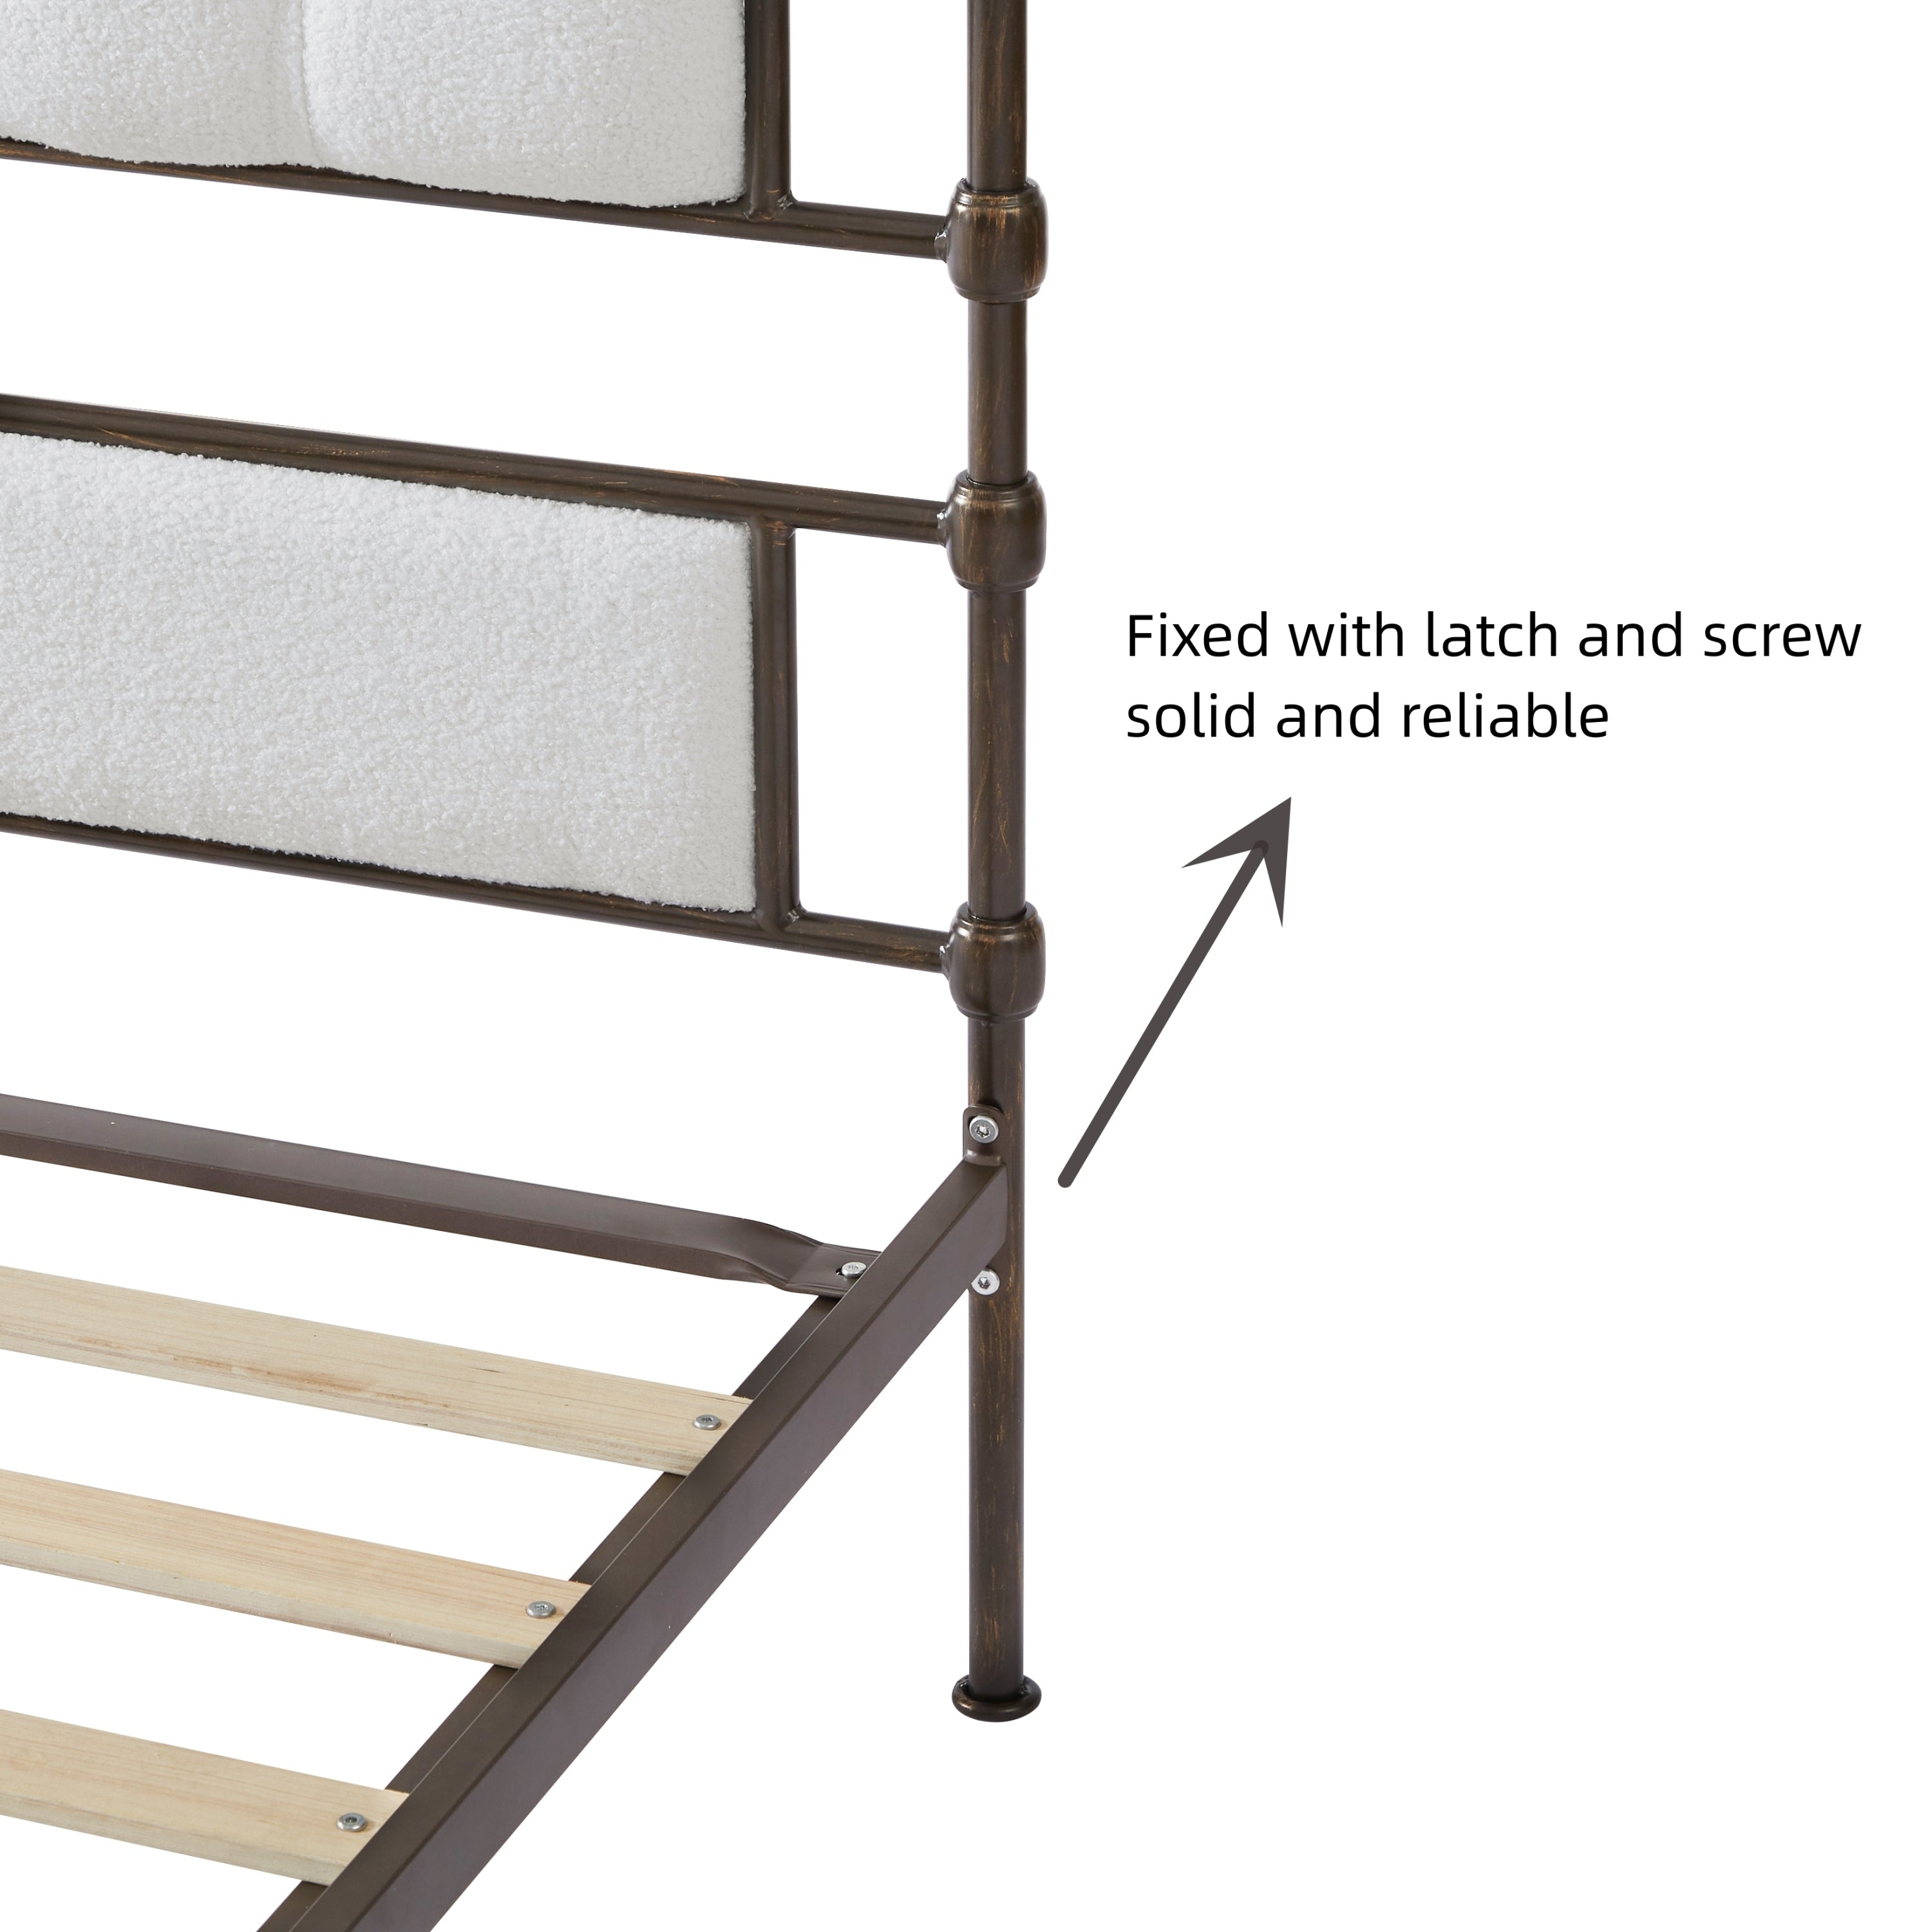 King Bed High Board Metal Bed - White